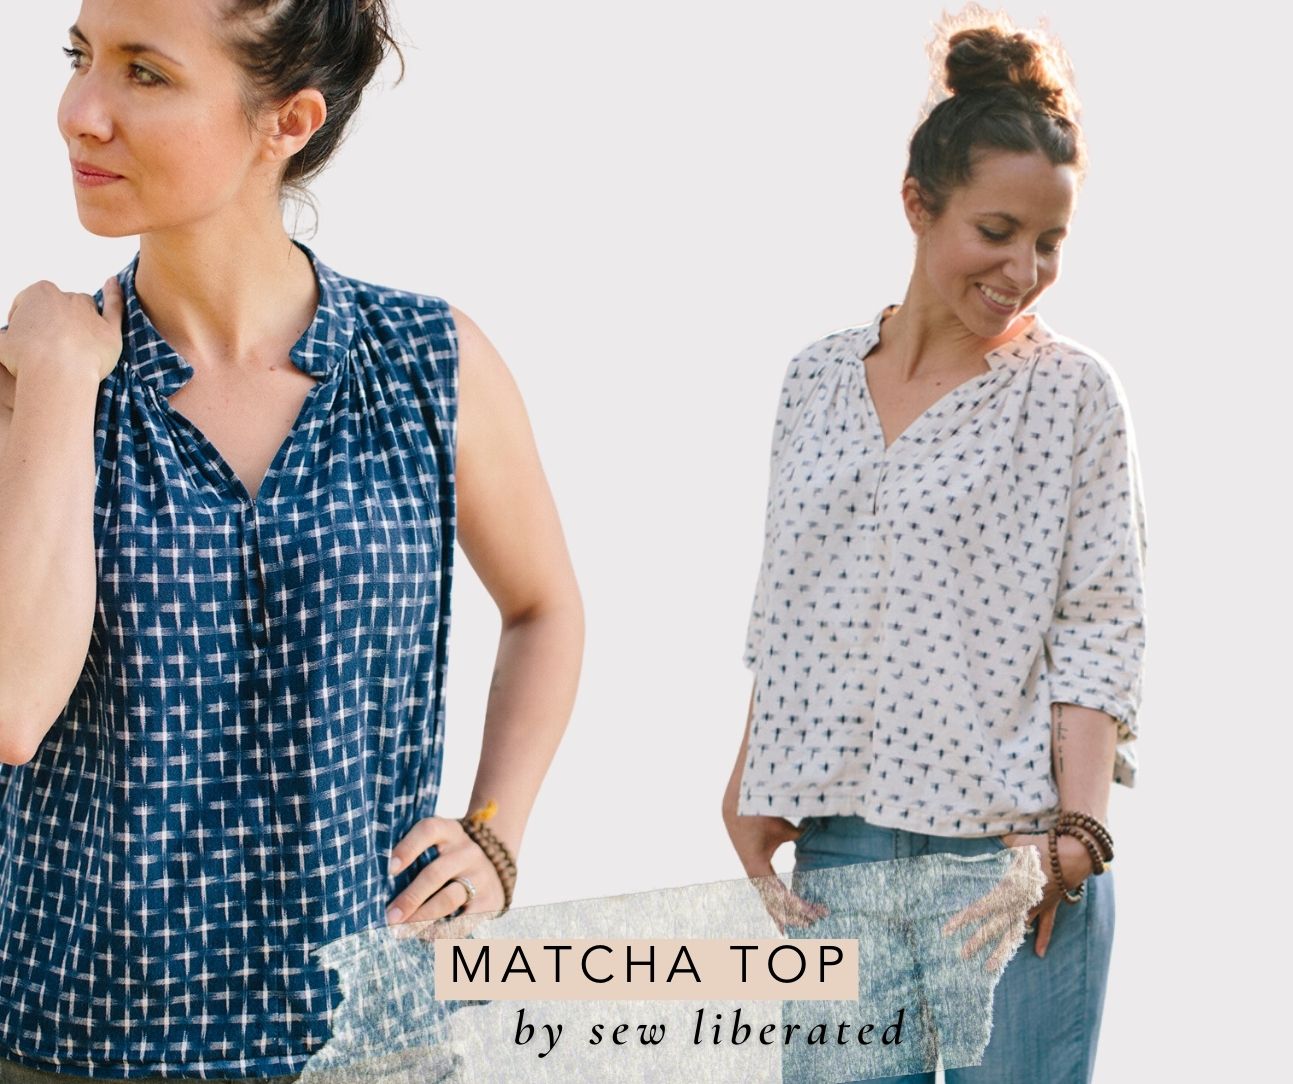 Easy Top Sewing Patterns - The Fold Line